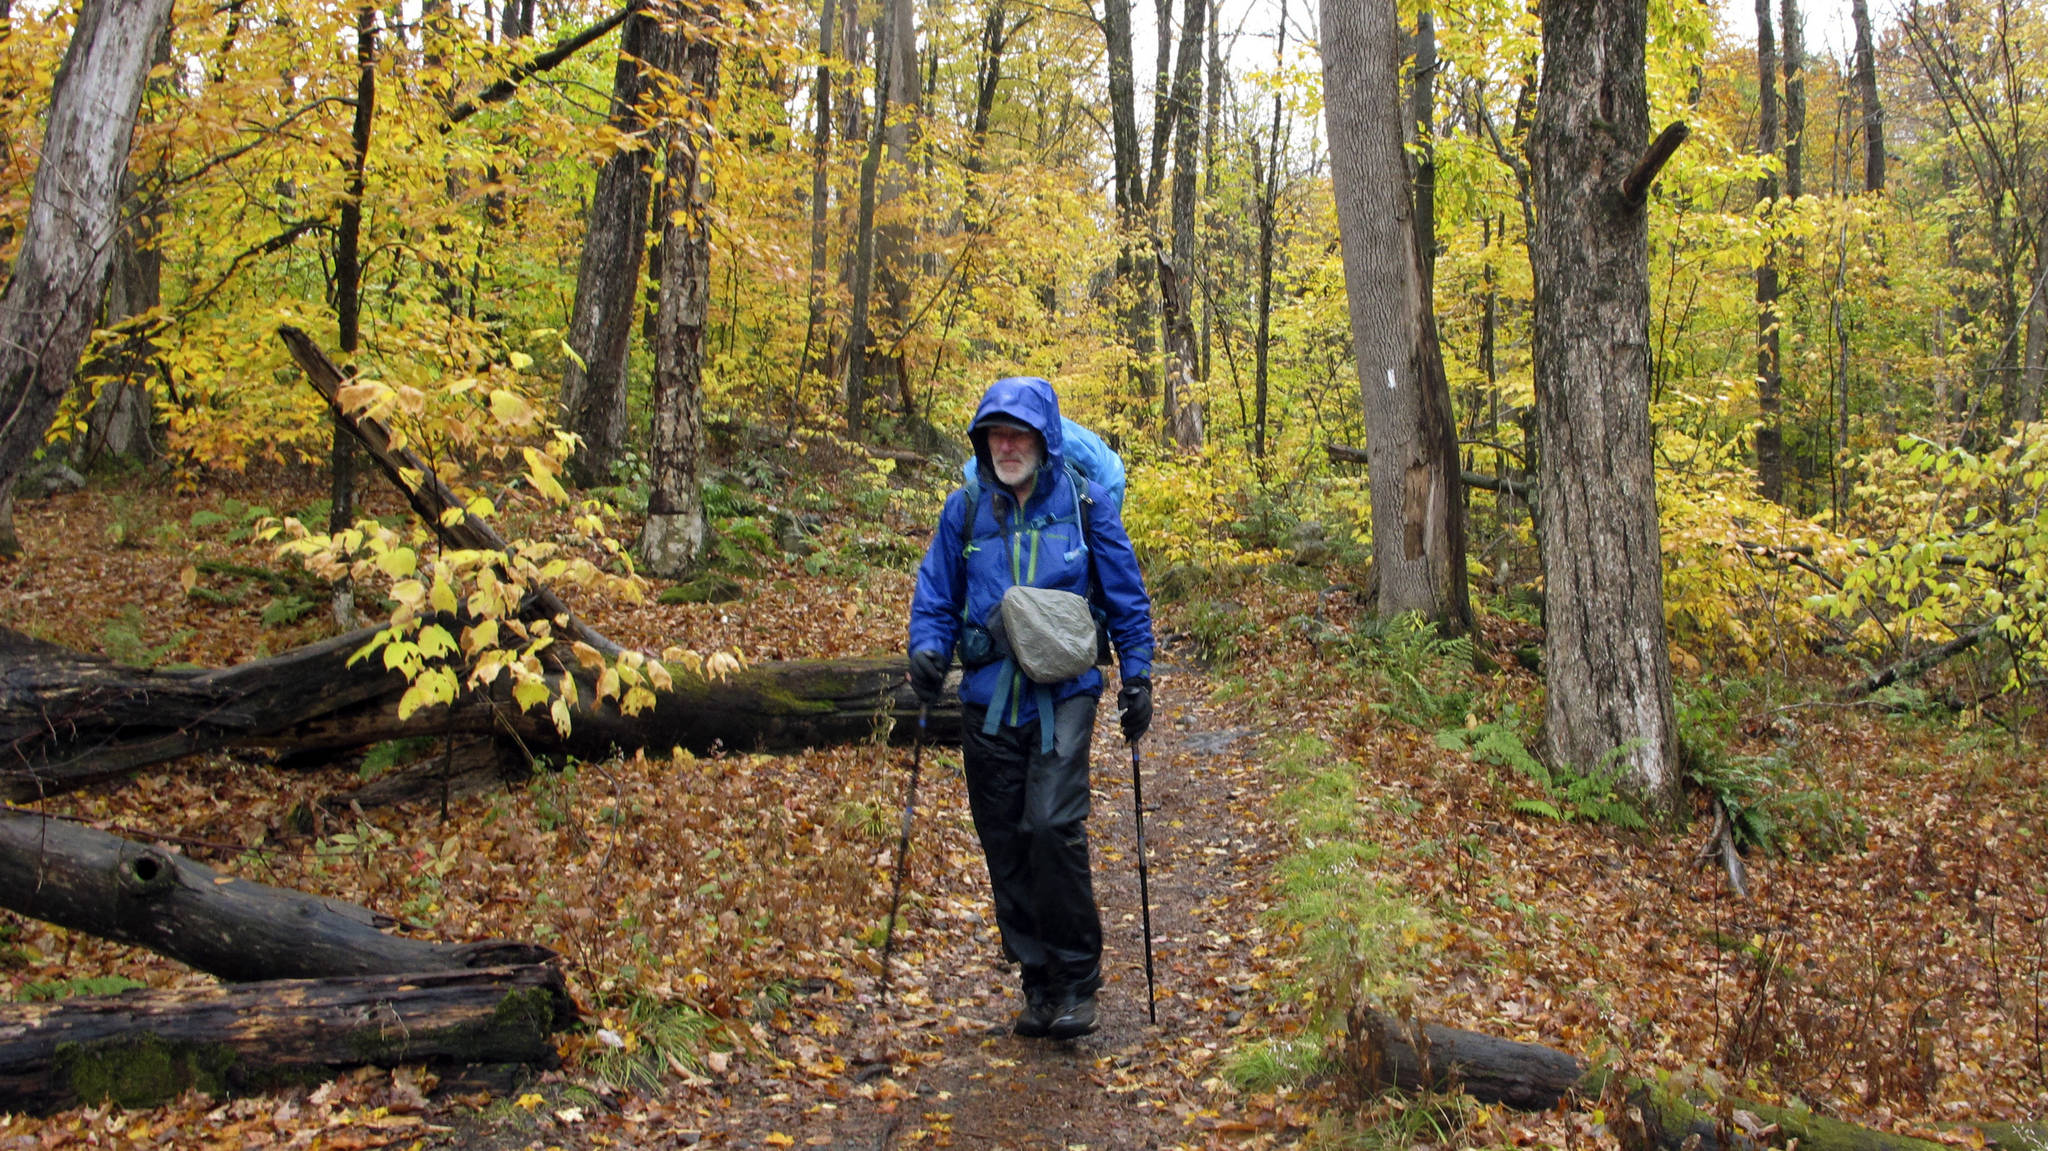 Artist Rob Mullen walks down Long Trail, the country’s oldest long distance trail, in Manchester, Vt., on Tuesday, Oct. 13, 2020. Mullen was nearing the end of his 272-mile month-long hike down the length of Vermont, painting along the way. (AP Photo/Lisa Rathke)